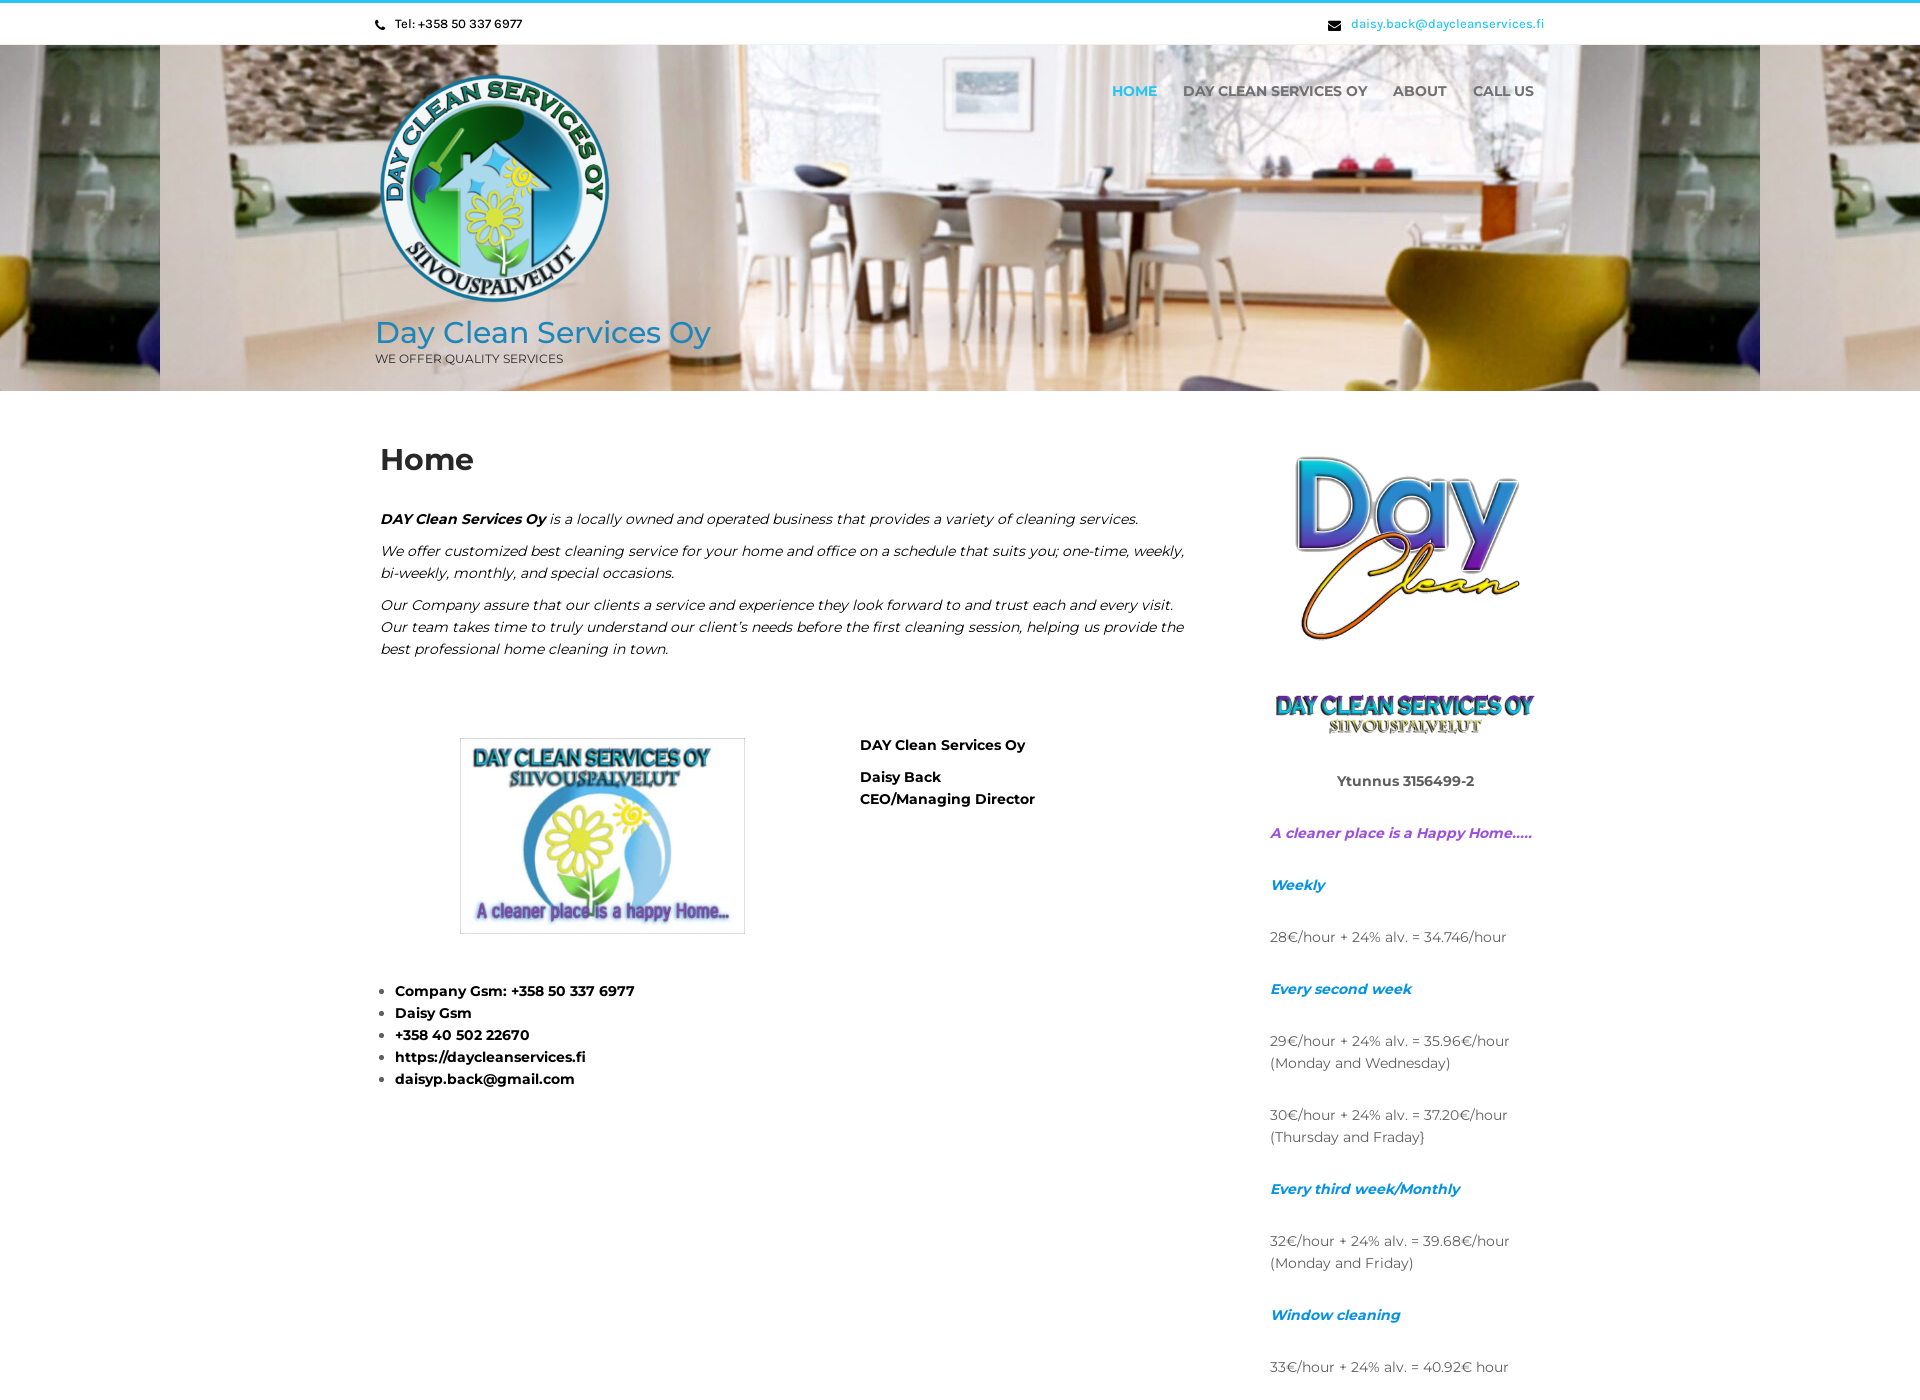 Screenshot for daycleanservices.fi